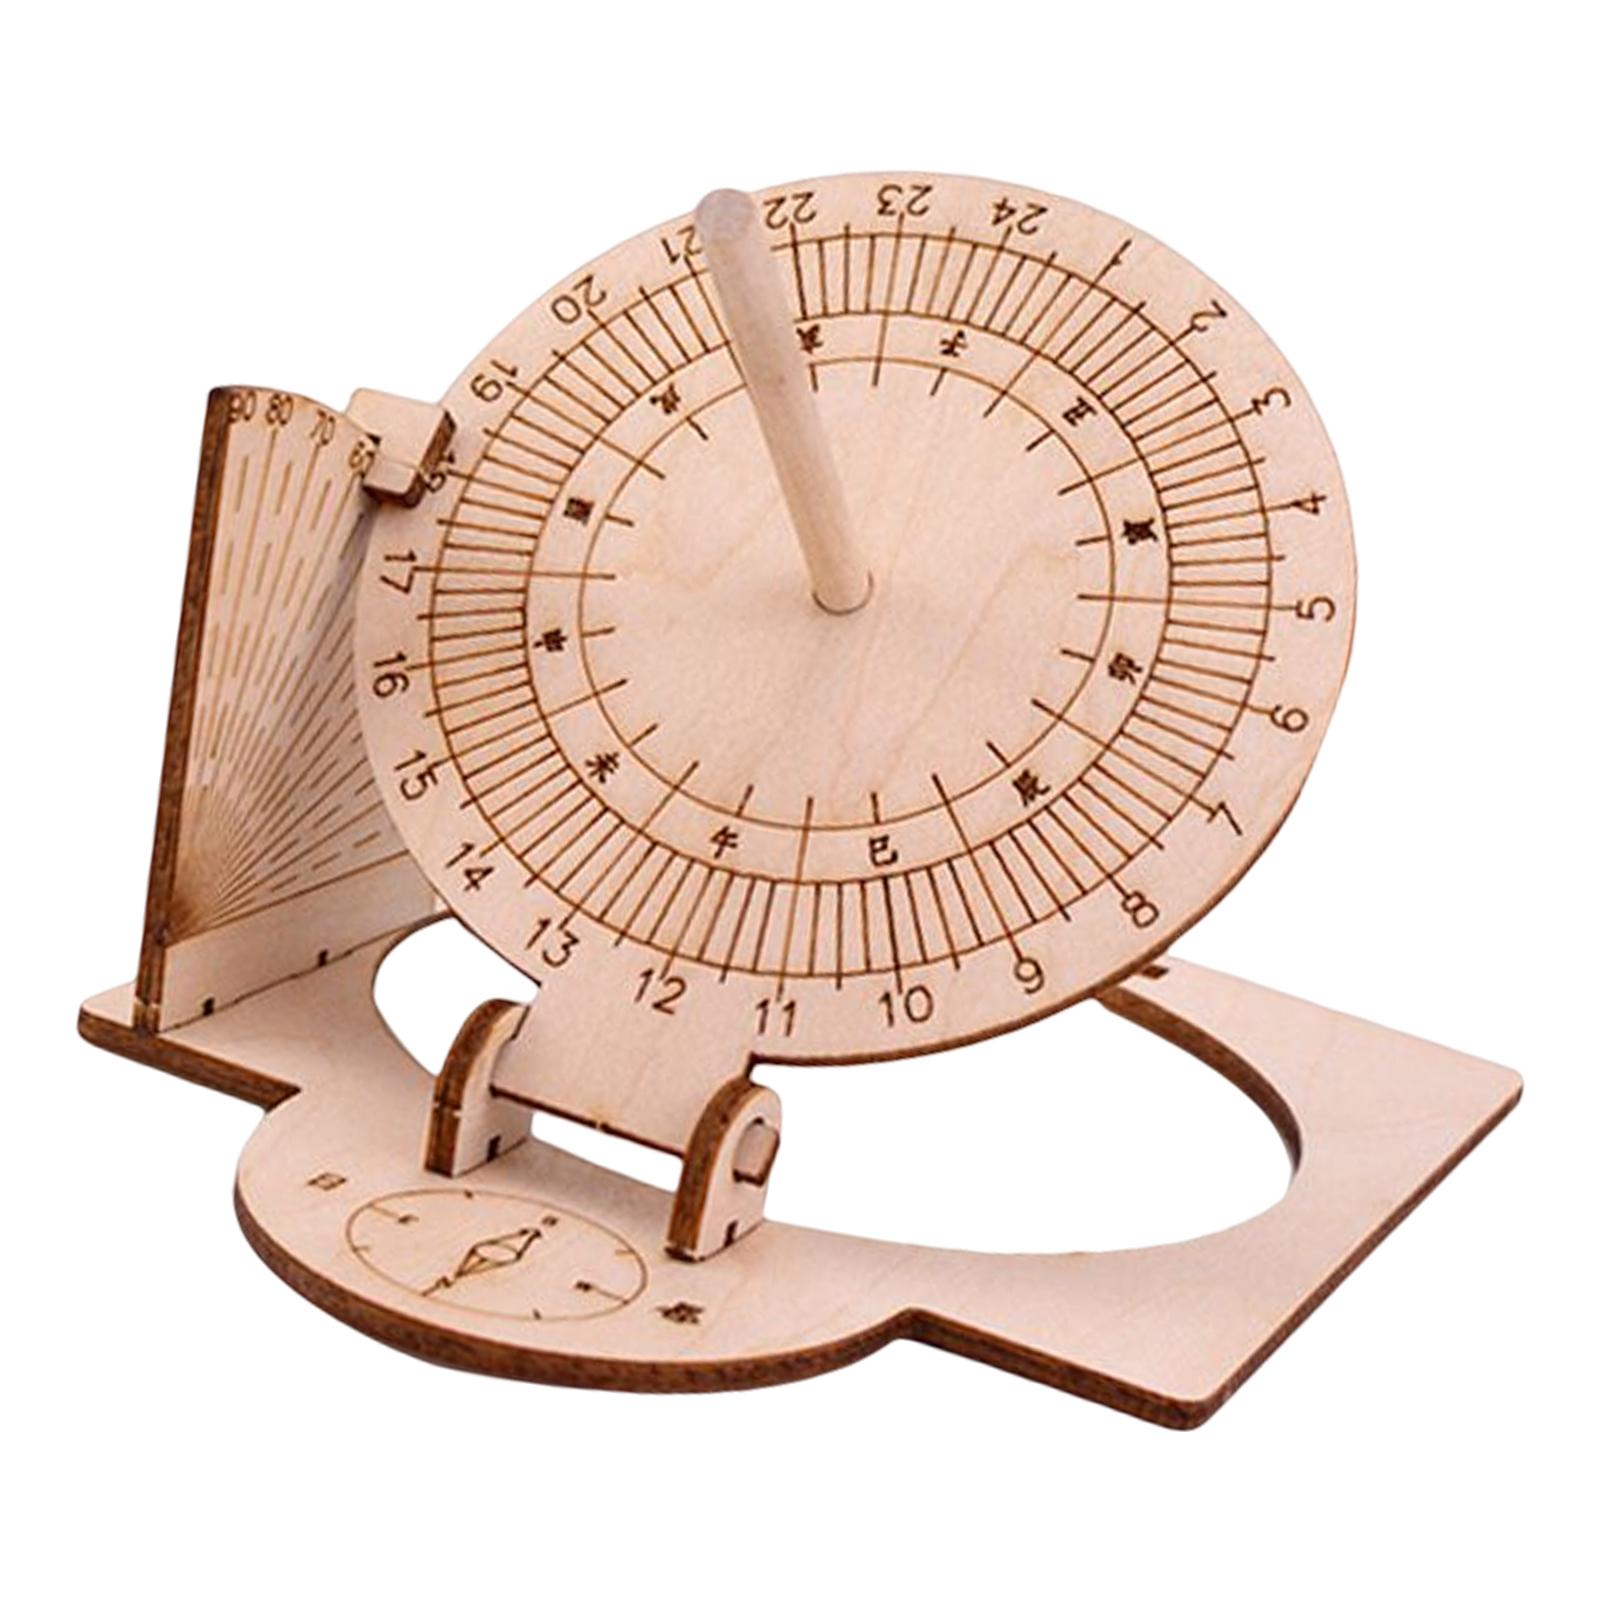 Equatorial Sundial Clock DIY Wooden Building for Adults and Children Experiment Equipment Durable Manual Assembly Model Teaching Aid - image 4 of 6